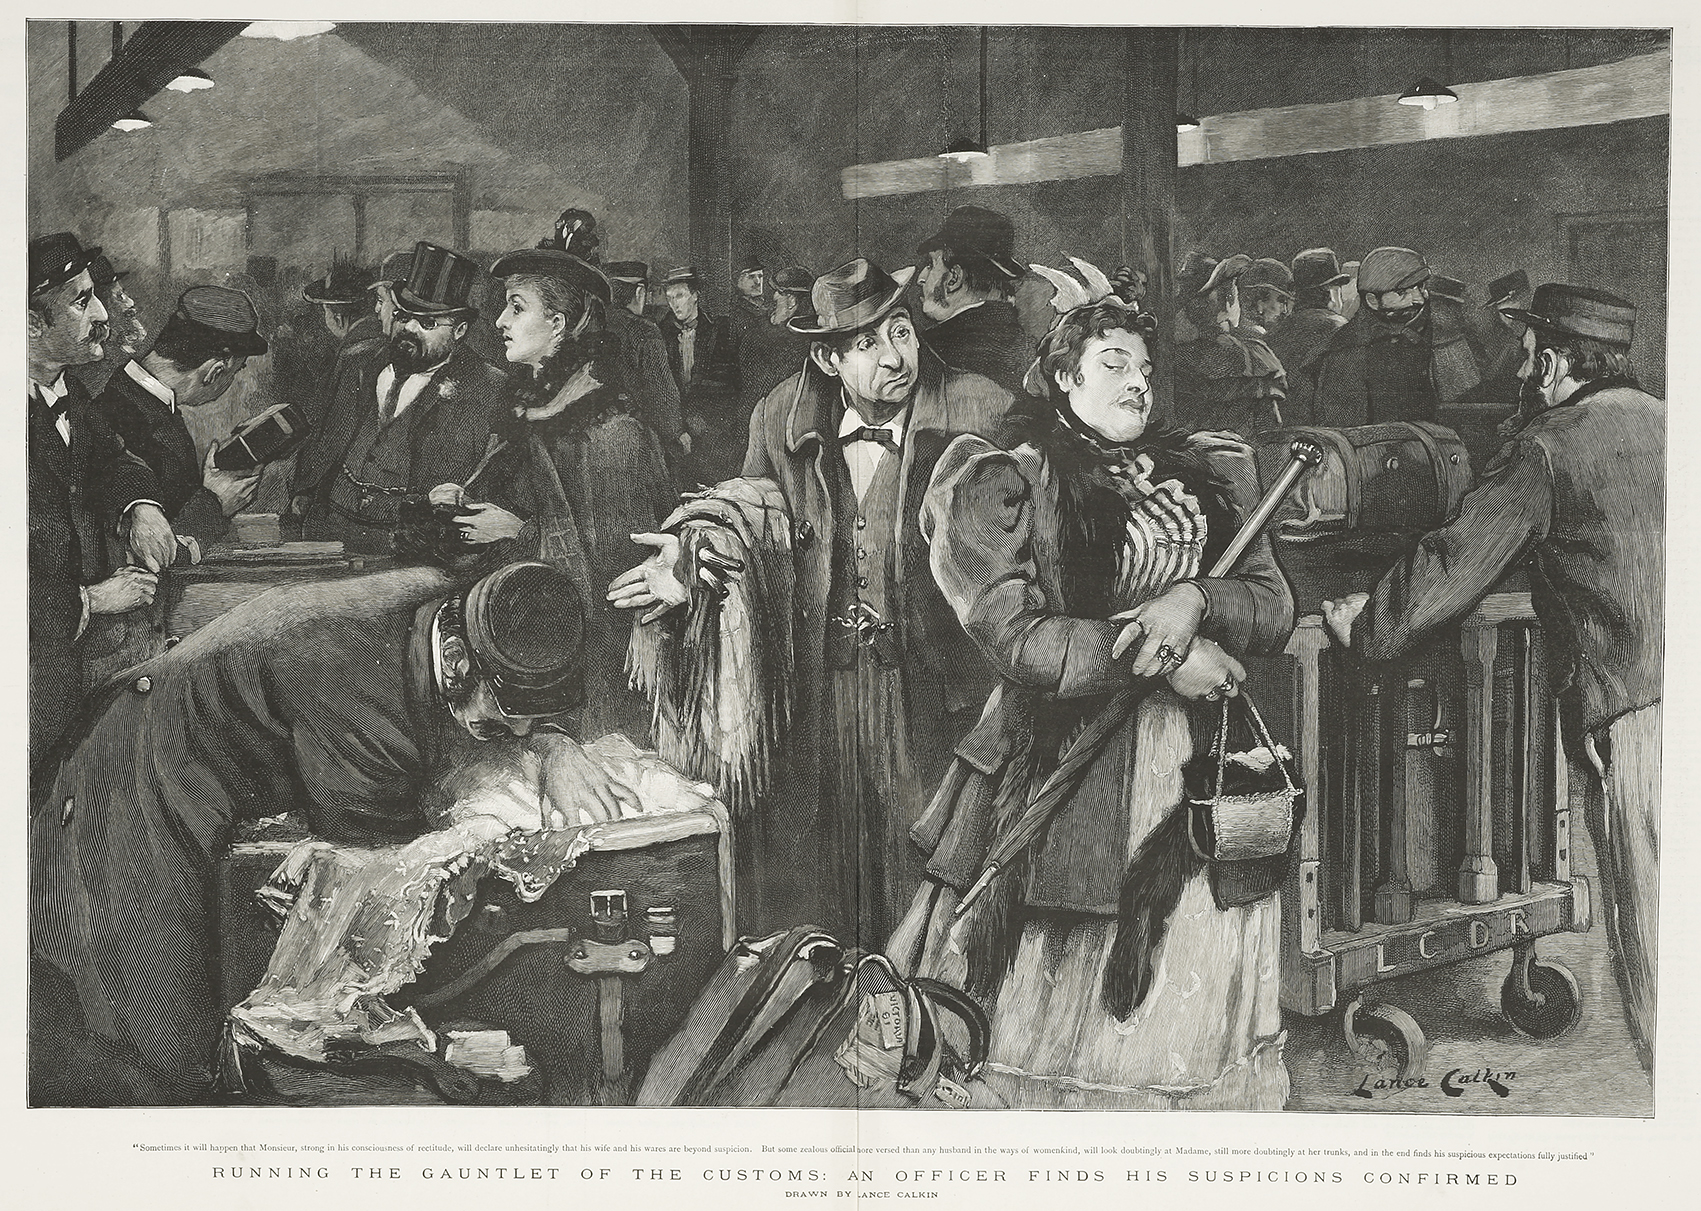 Running the Gauntlet of the Customs: An Officer finds his Suspicions confirmed. - Antique Print from 1895